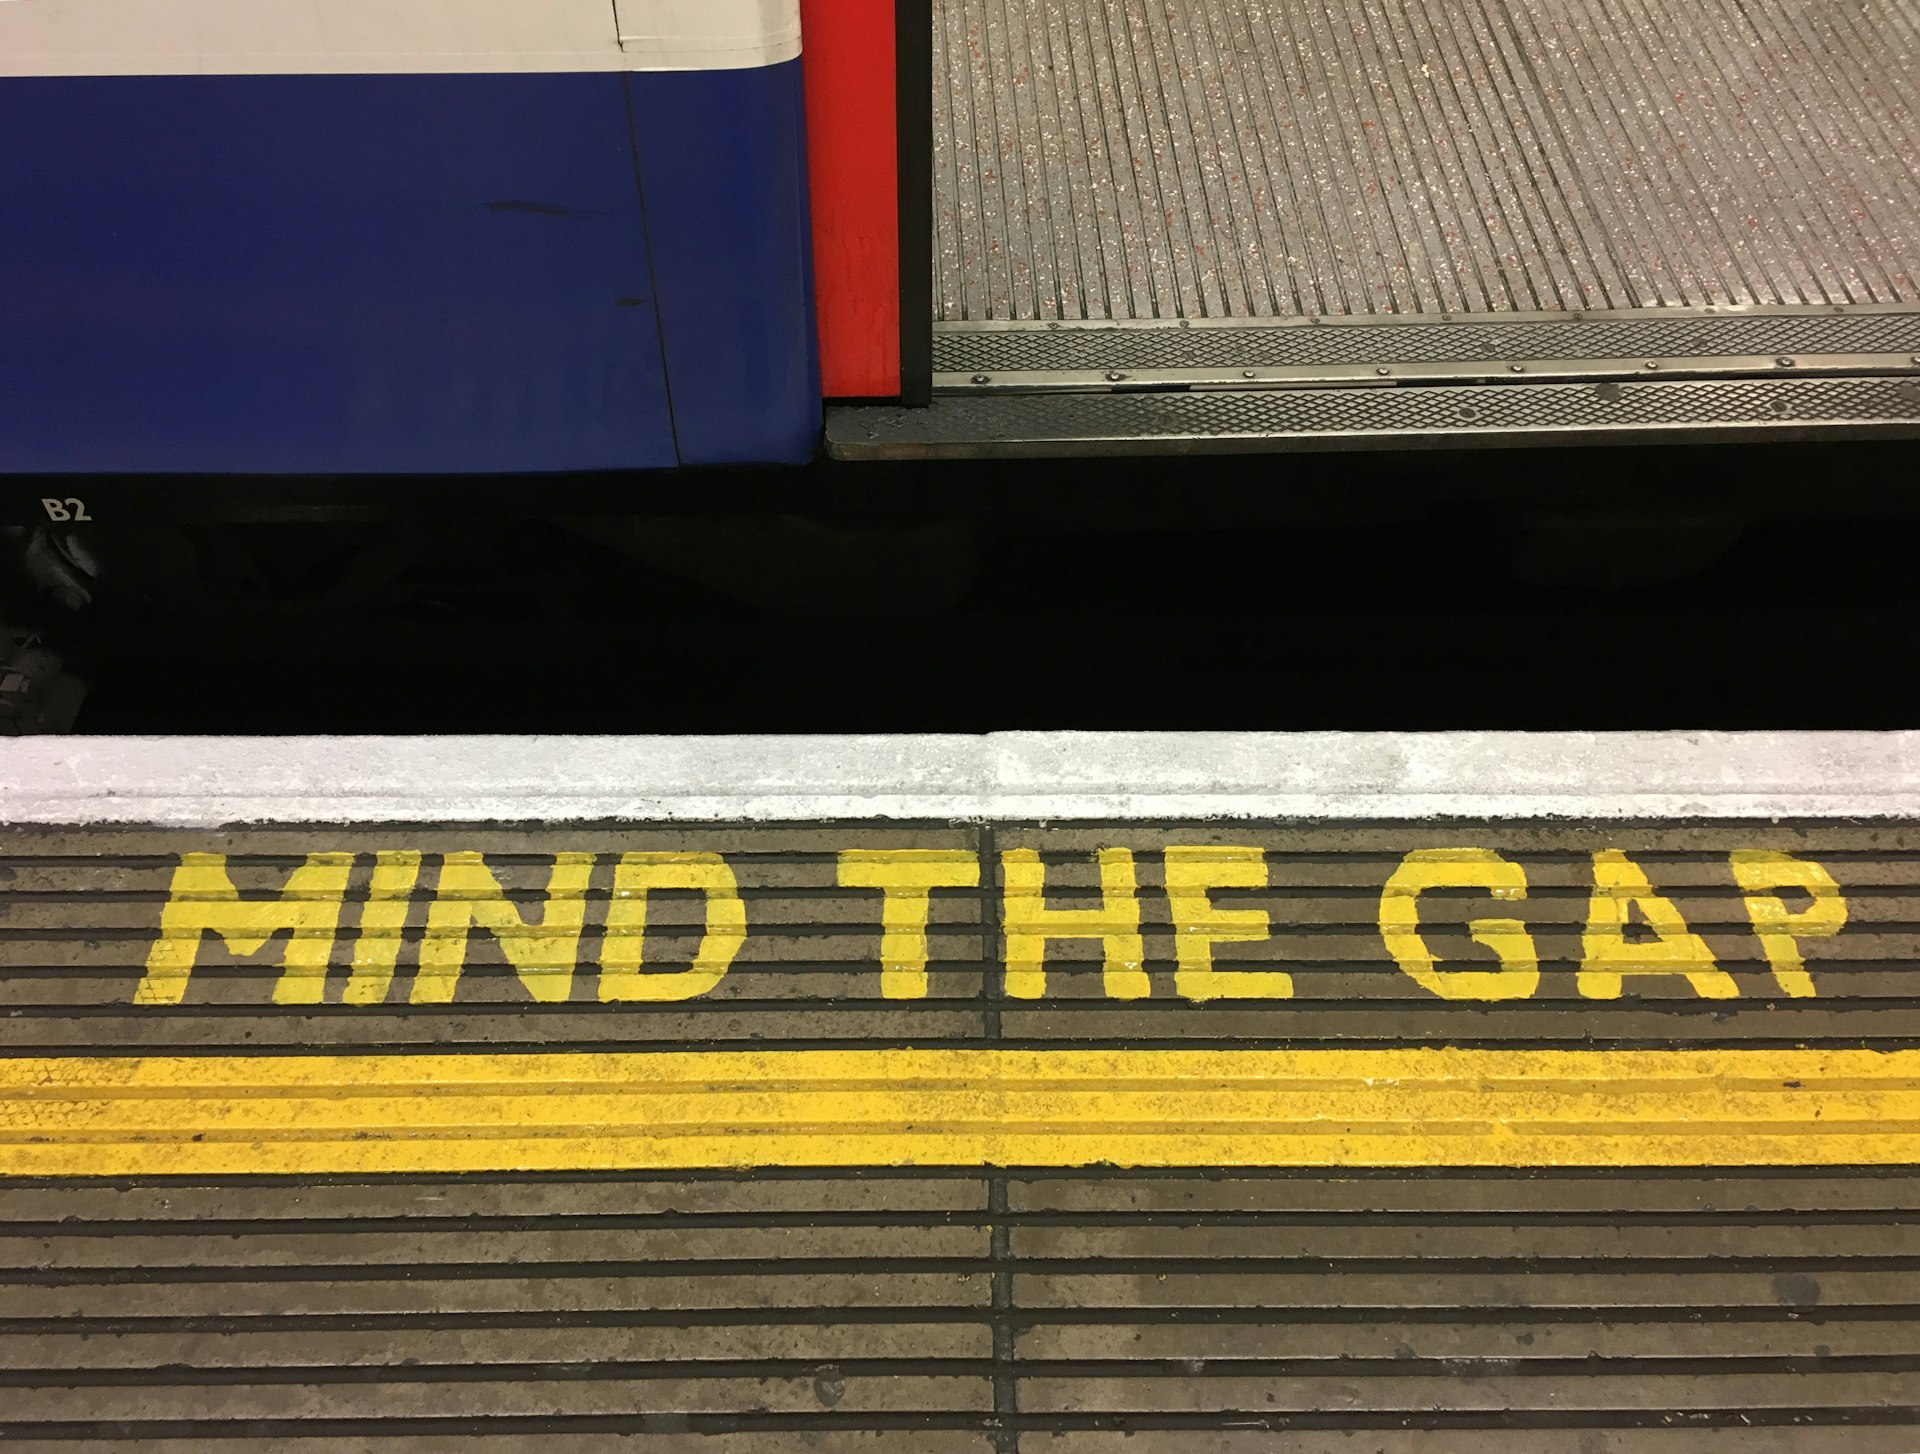 The "mind the gap" warning sign that is painted in yellow on the platforms of most London underground stations